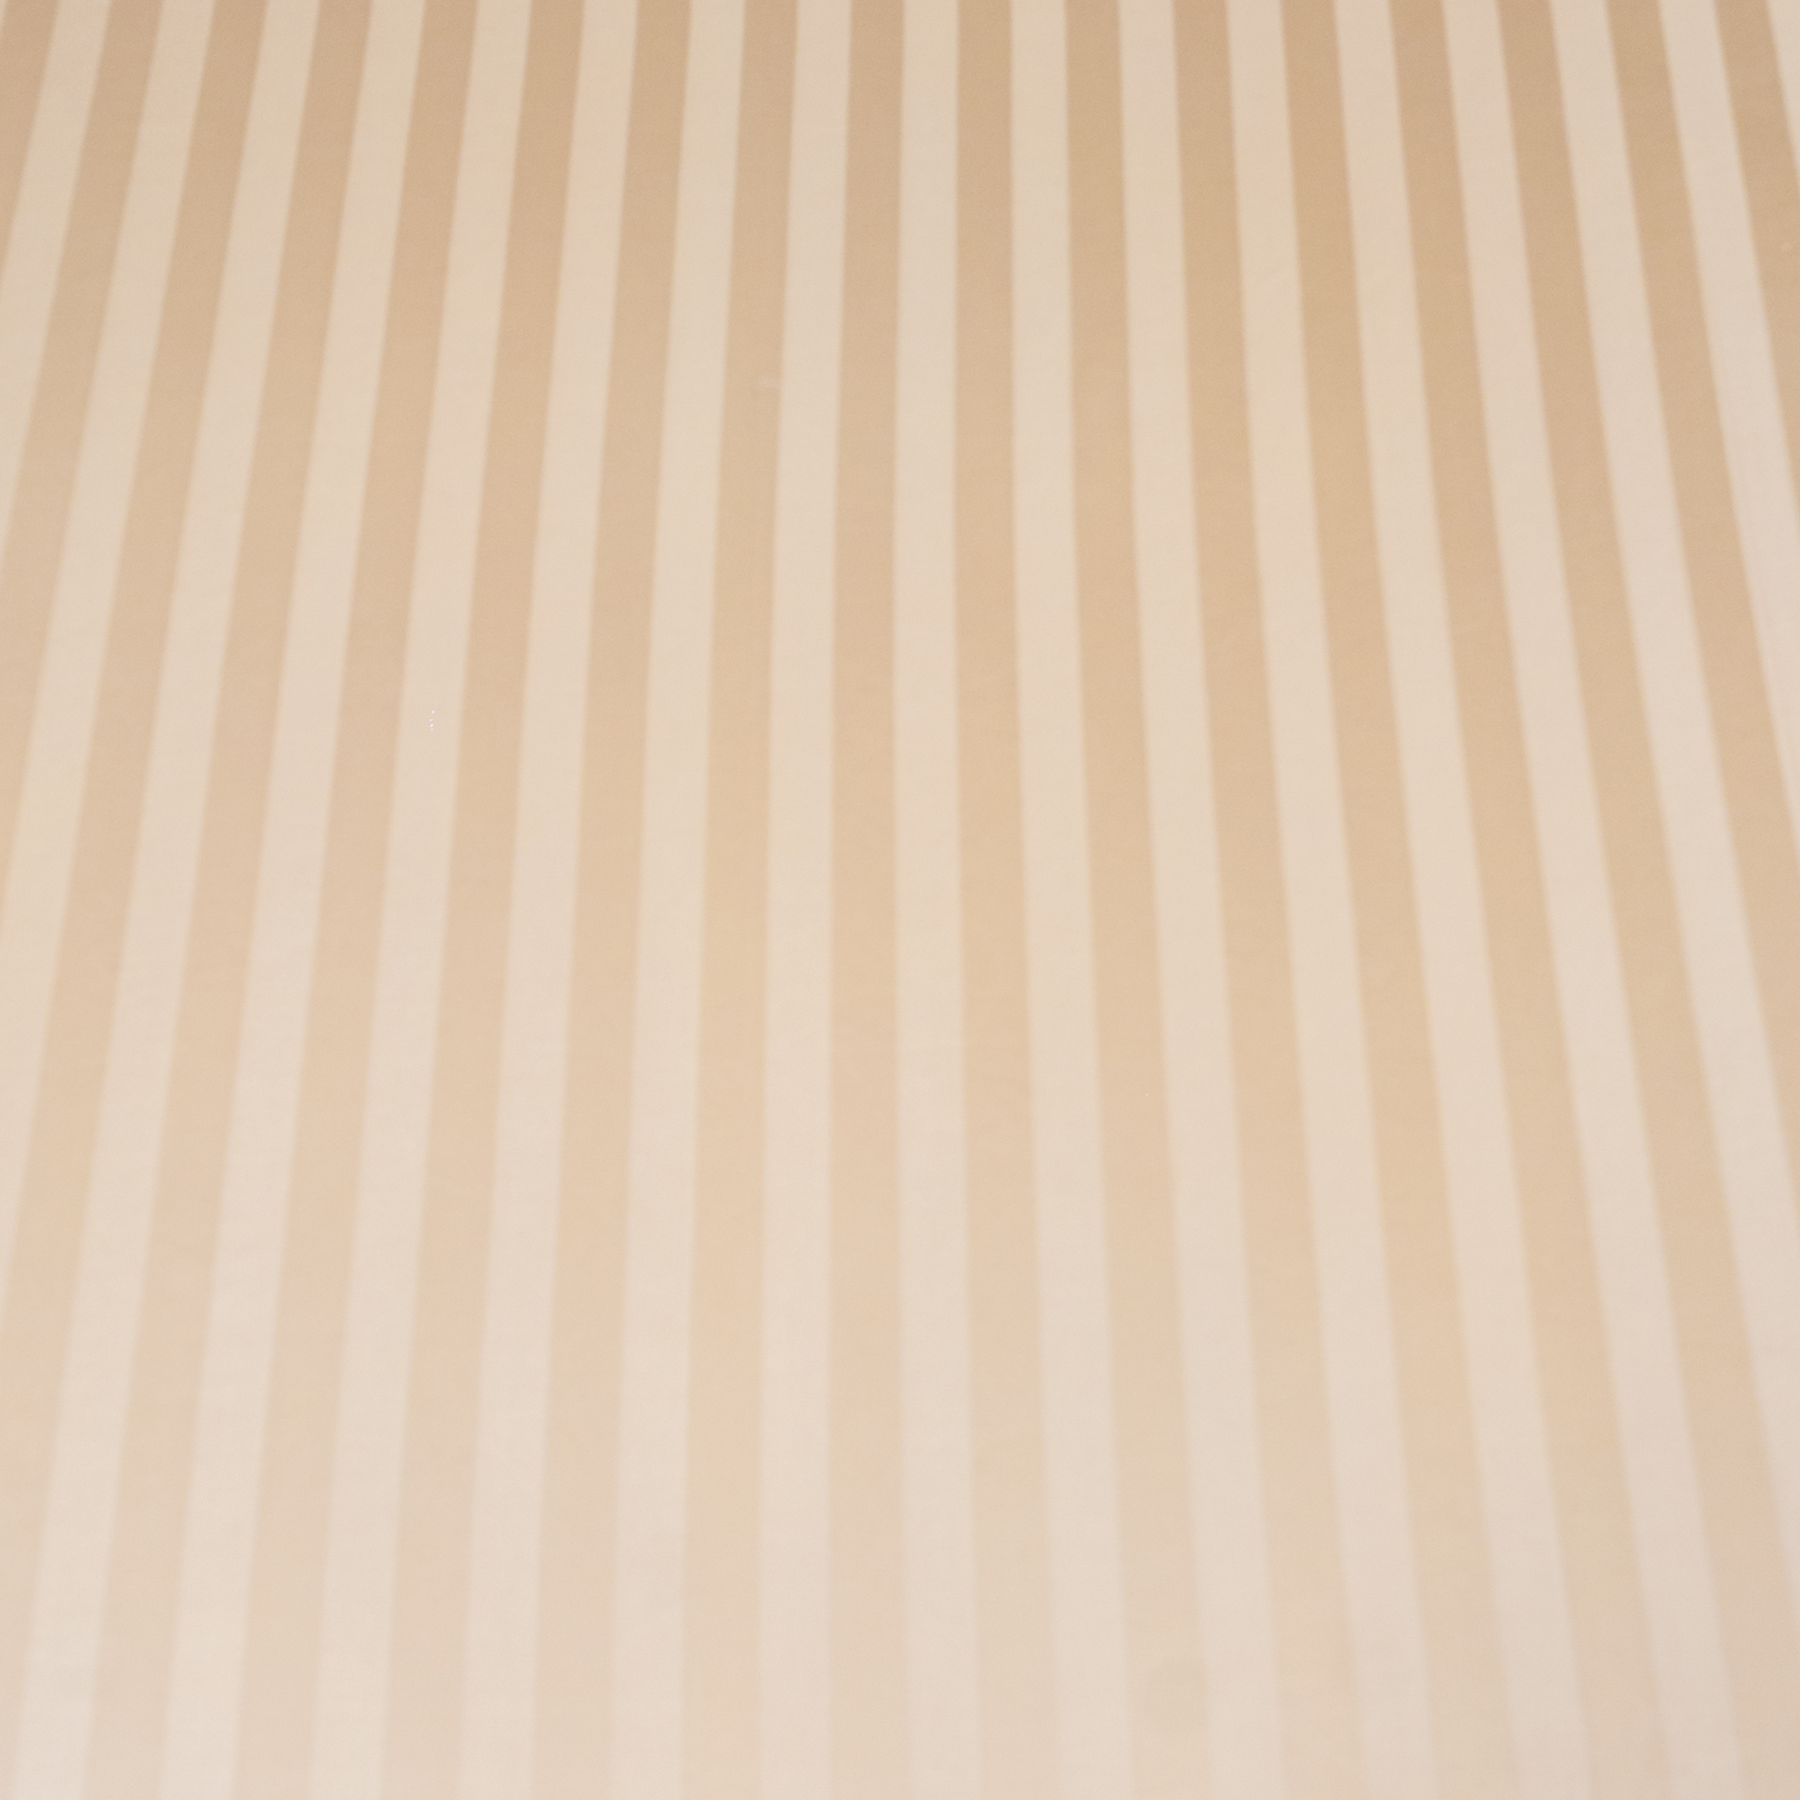 THE LUXELIFE HOMES BEIGE STRIPED COTTON BEDSHEET